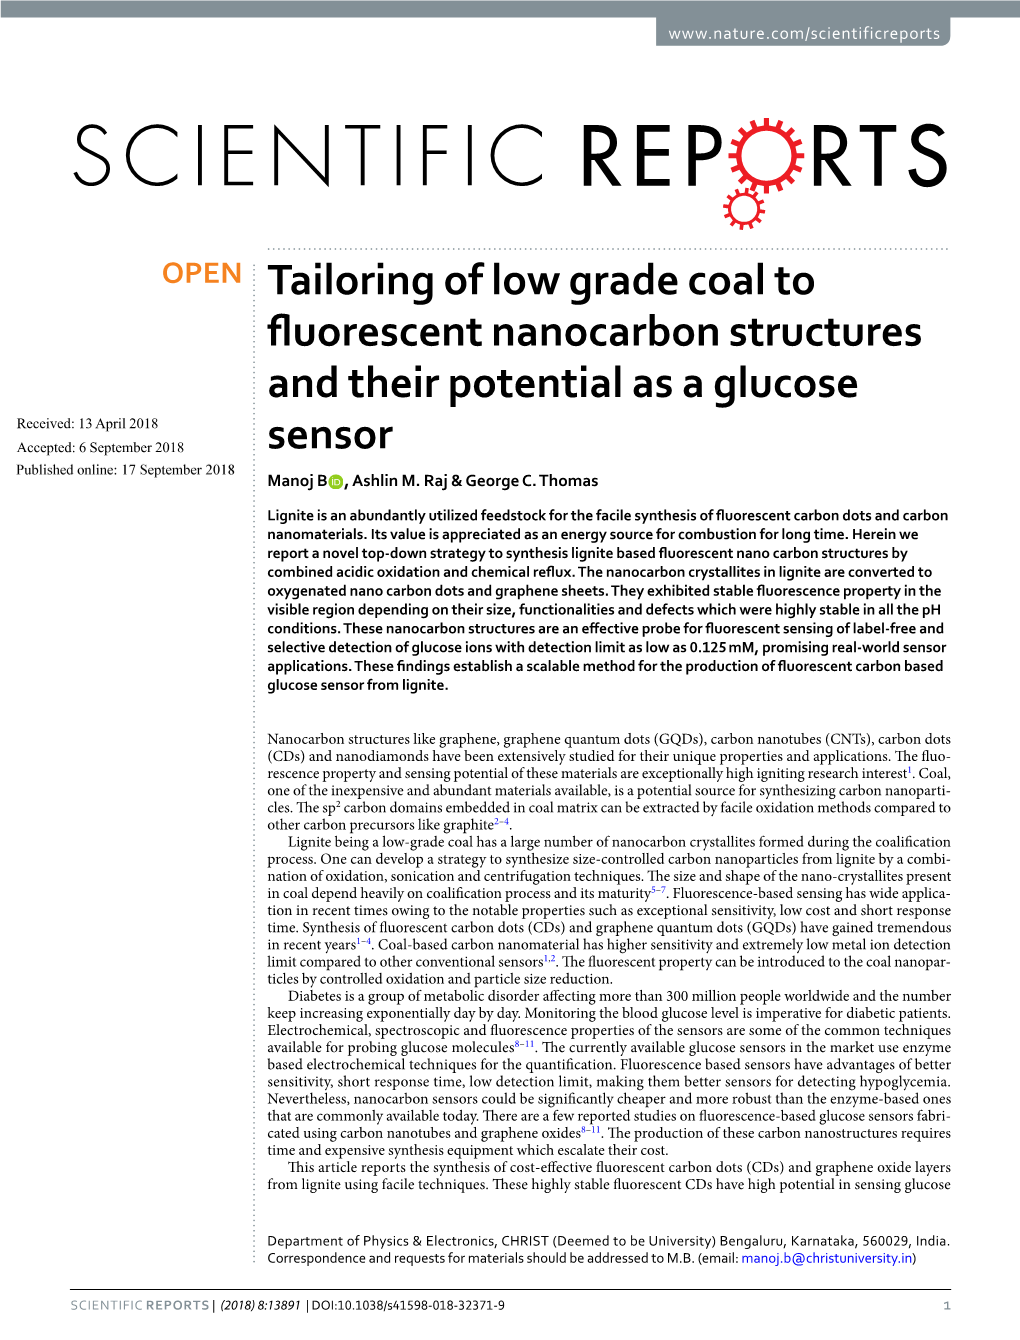 Tailoring of Low Grade Coal to Fluorescent Nanocarbon Structures